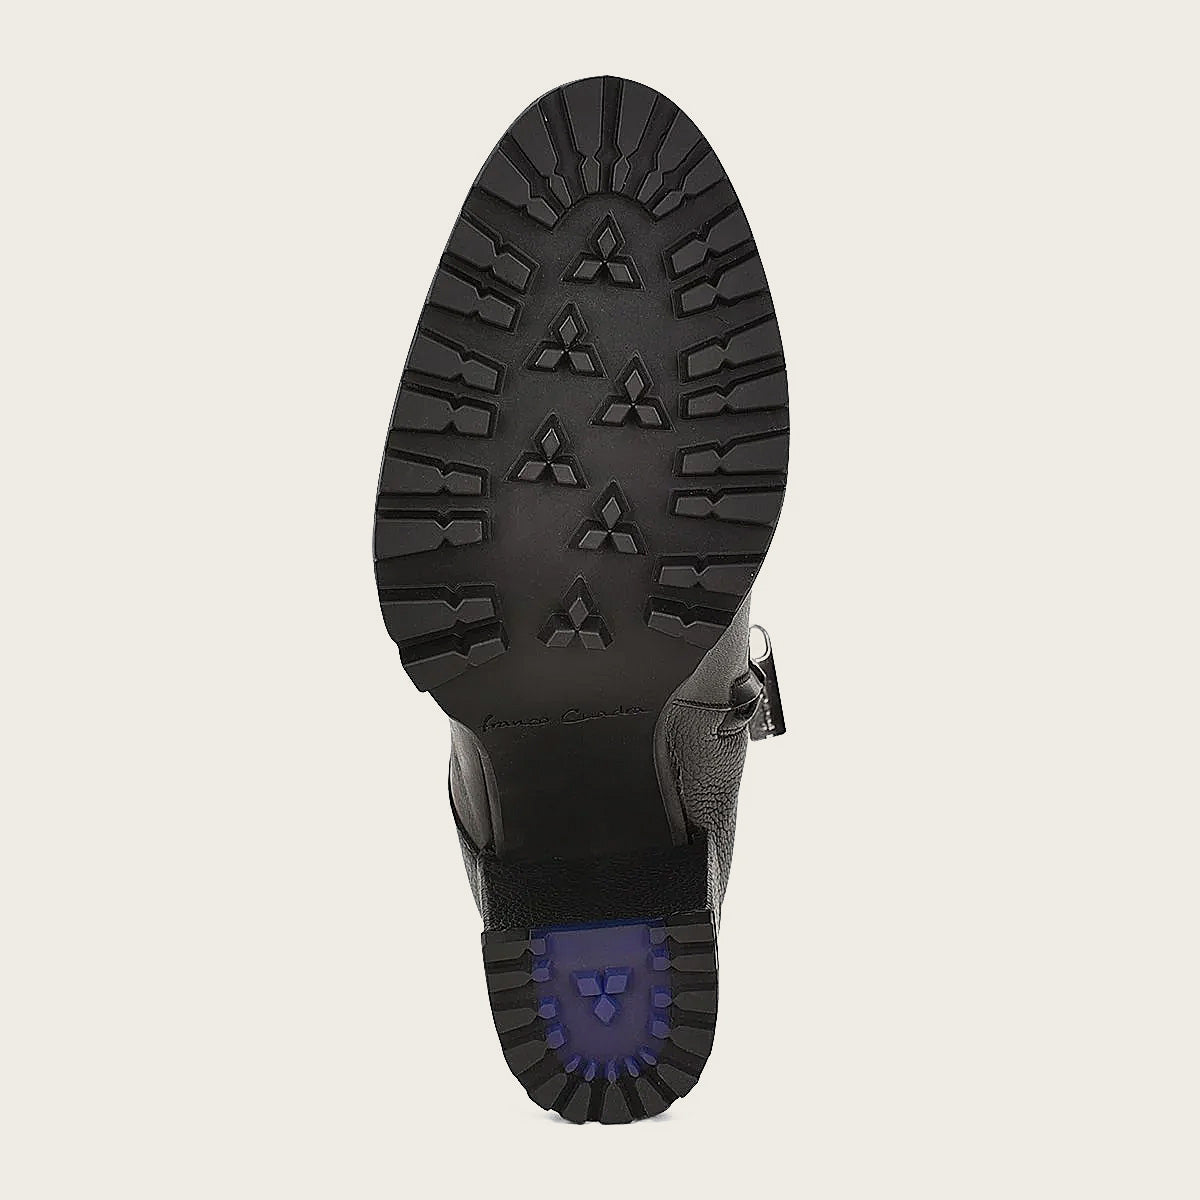 While the rubber sole and leather-lined heel provide stability.